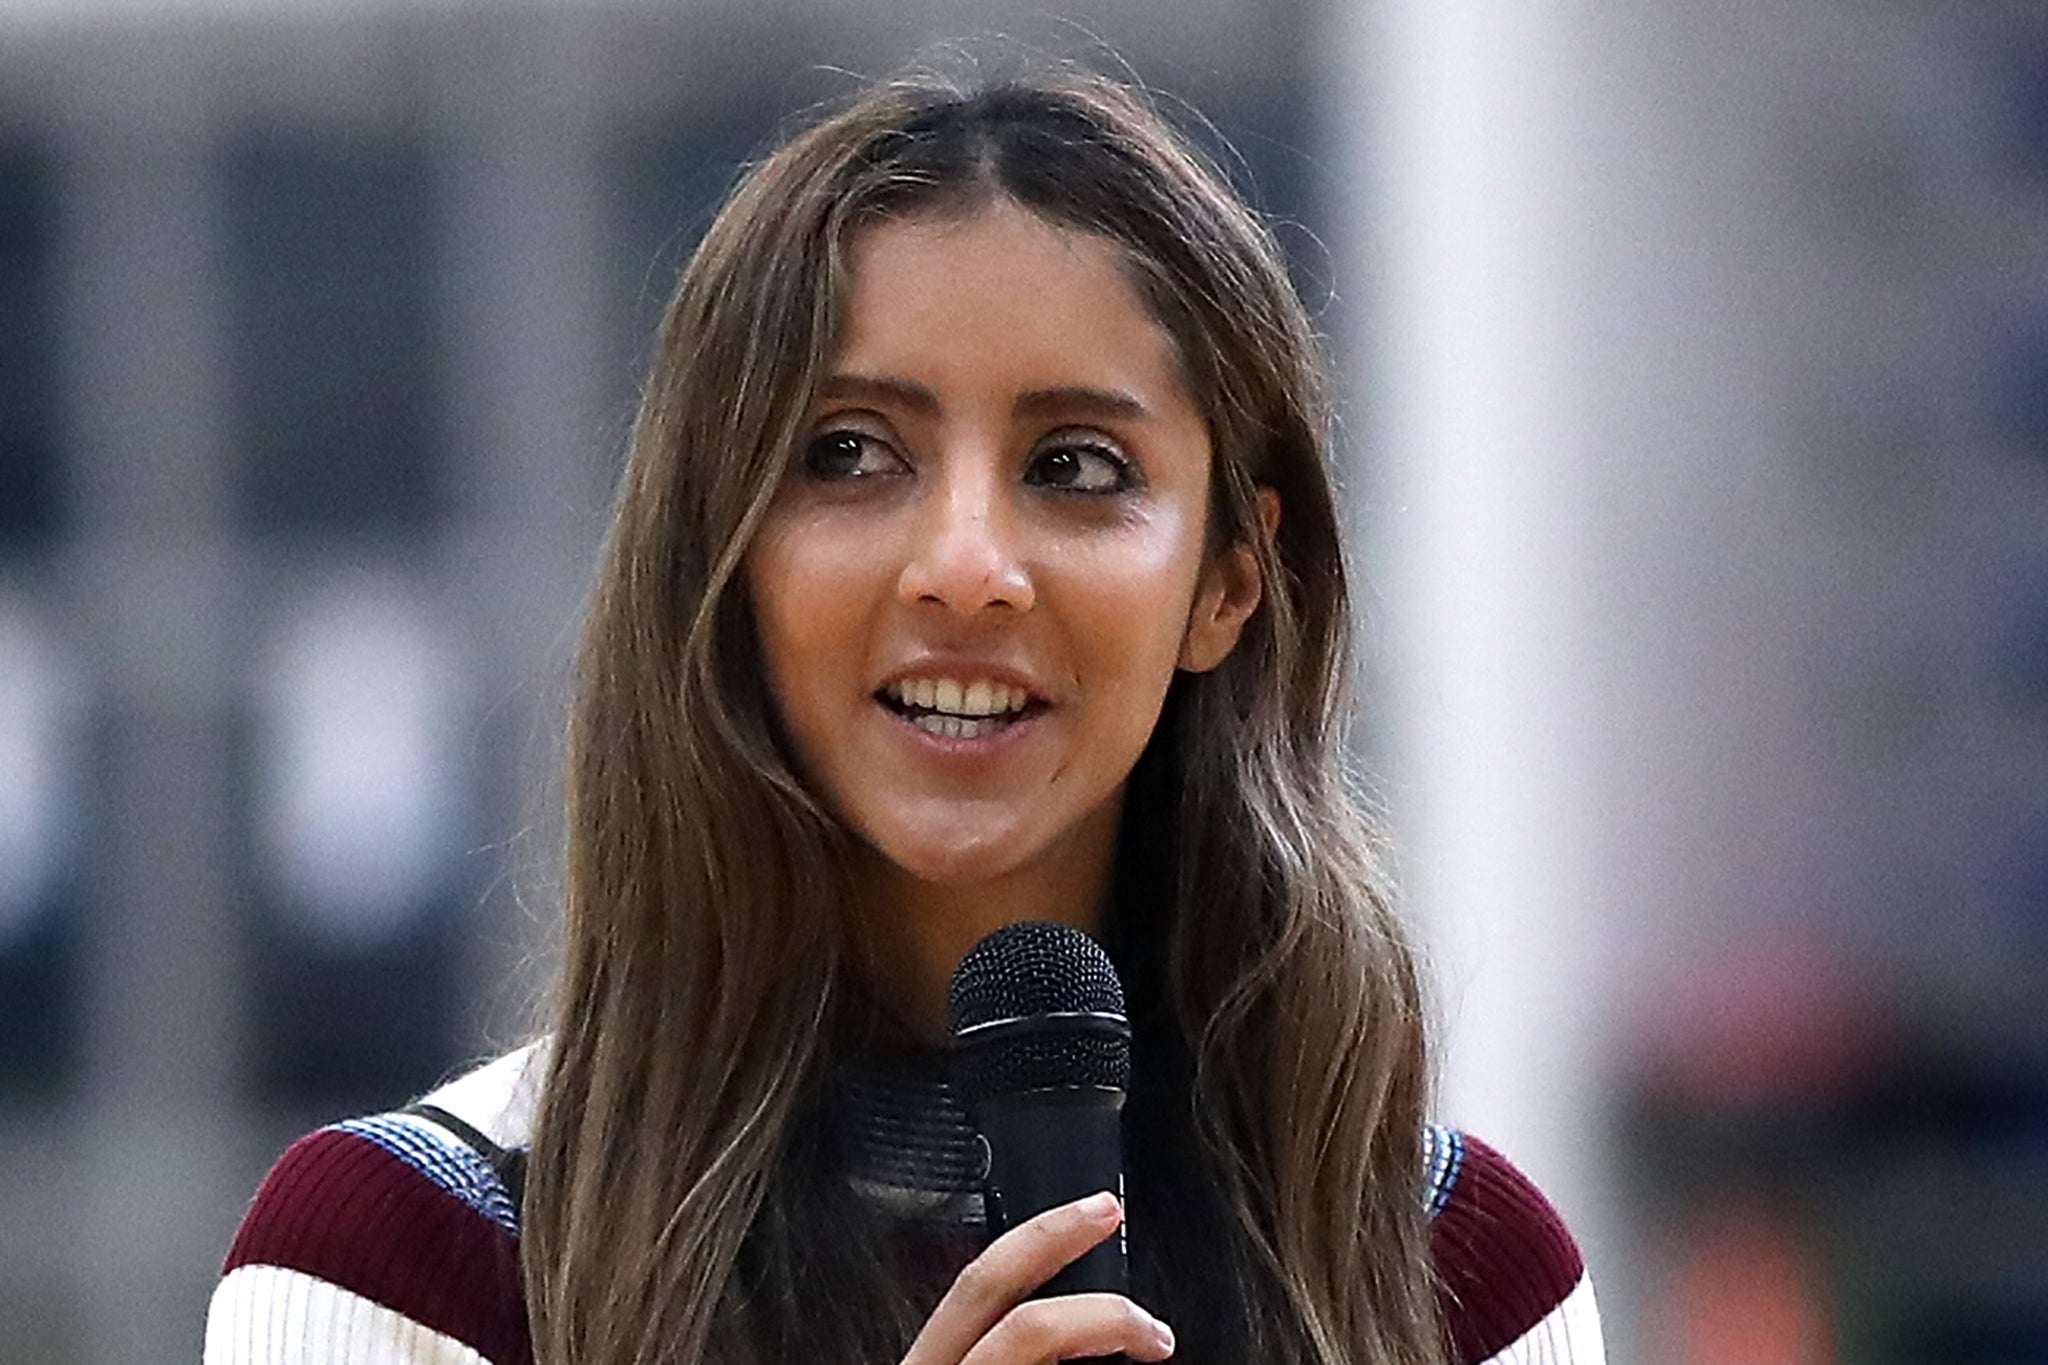 New Zealand Green Party MP Golriz Ghahraman has resigned after being accused of shoplifting